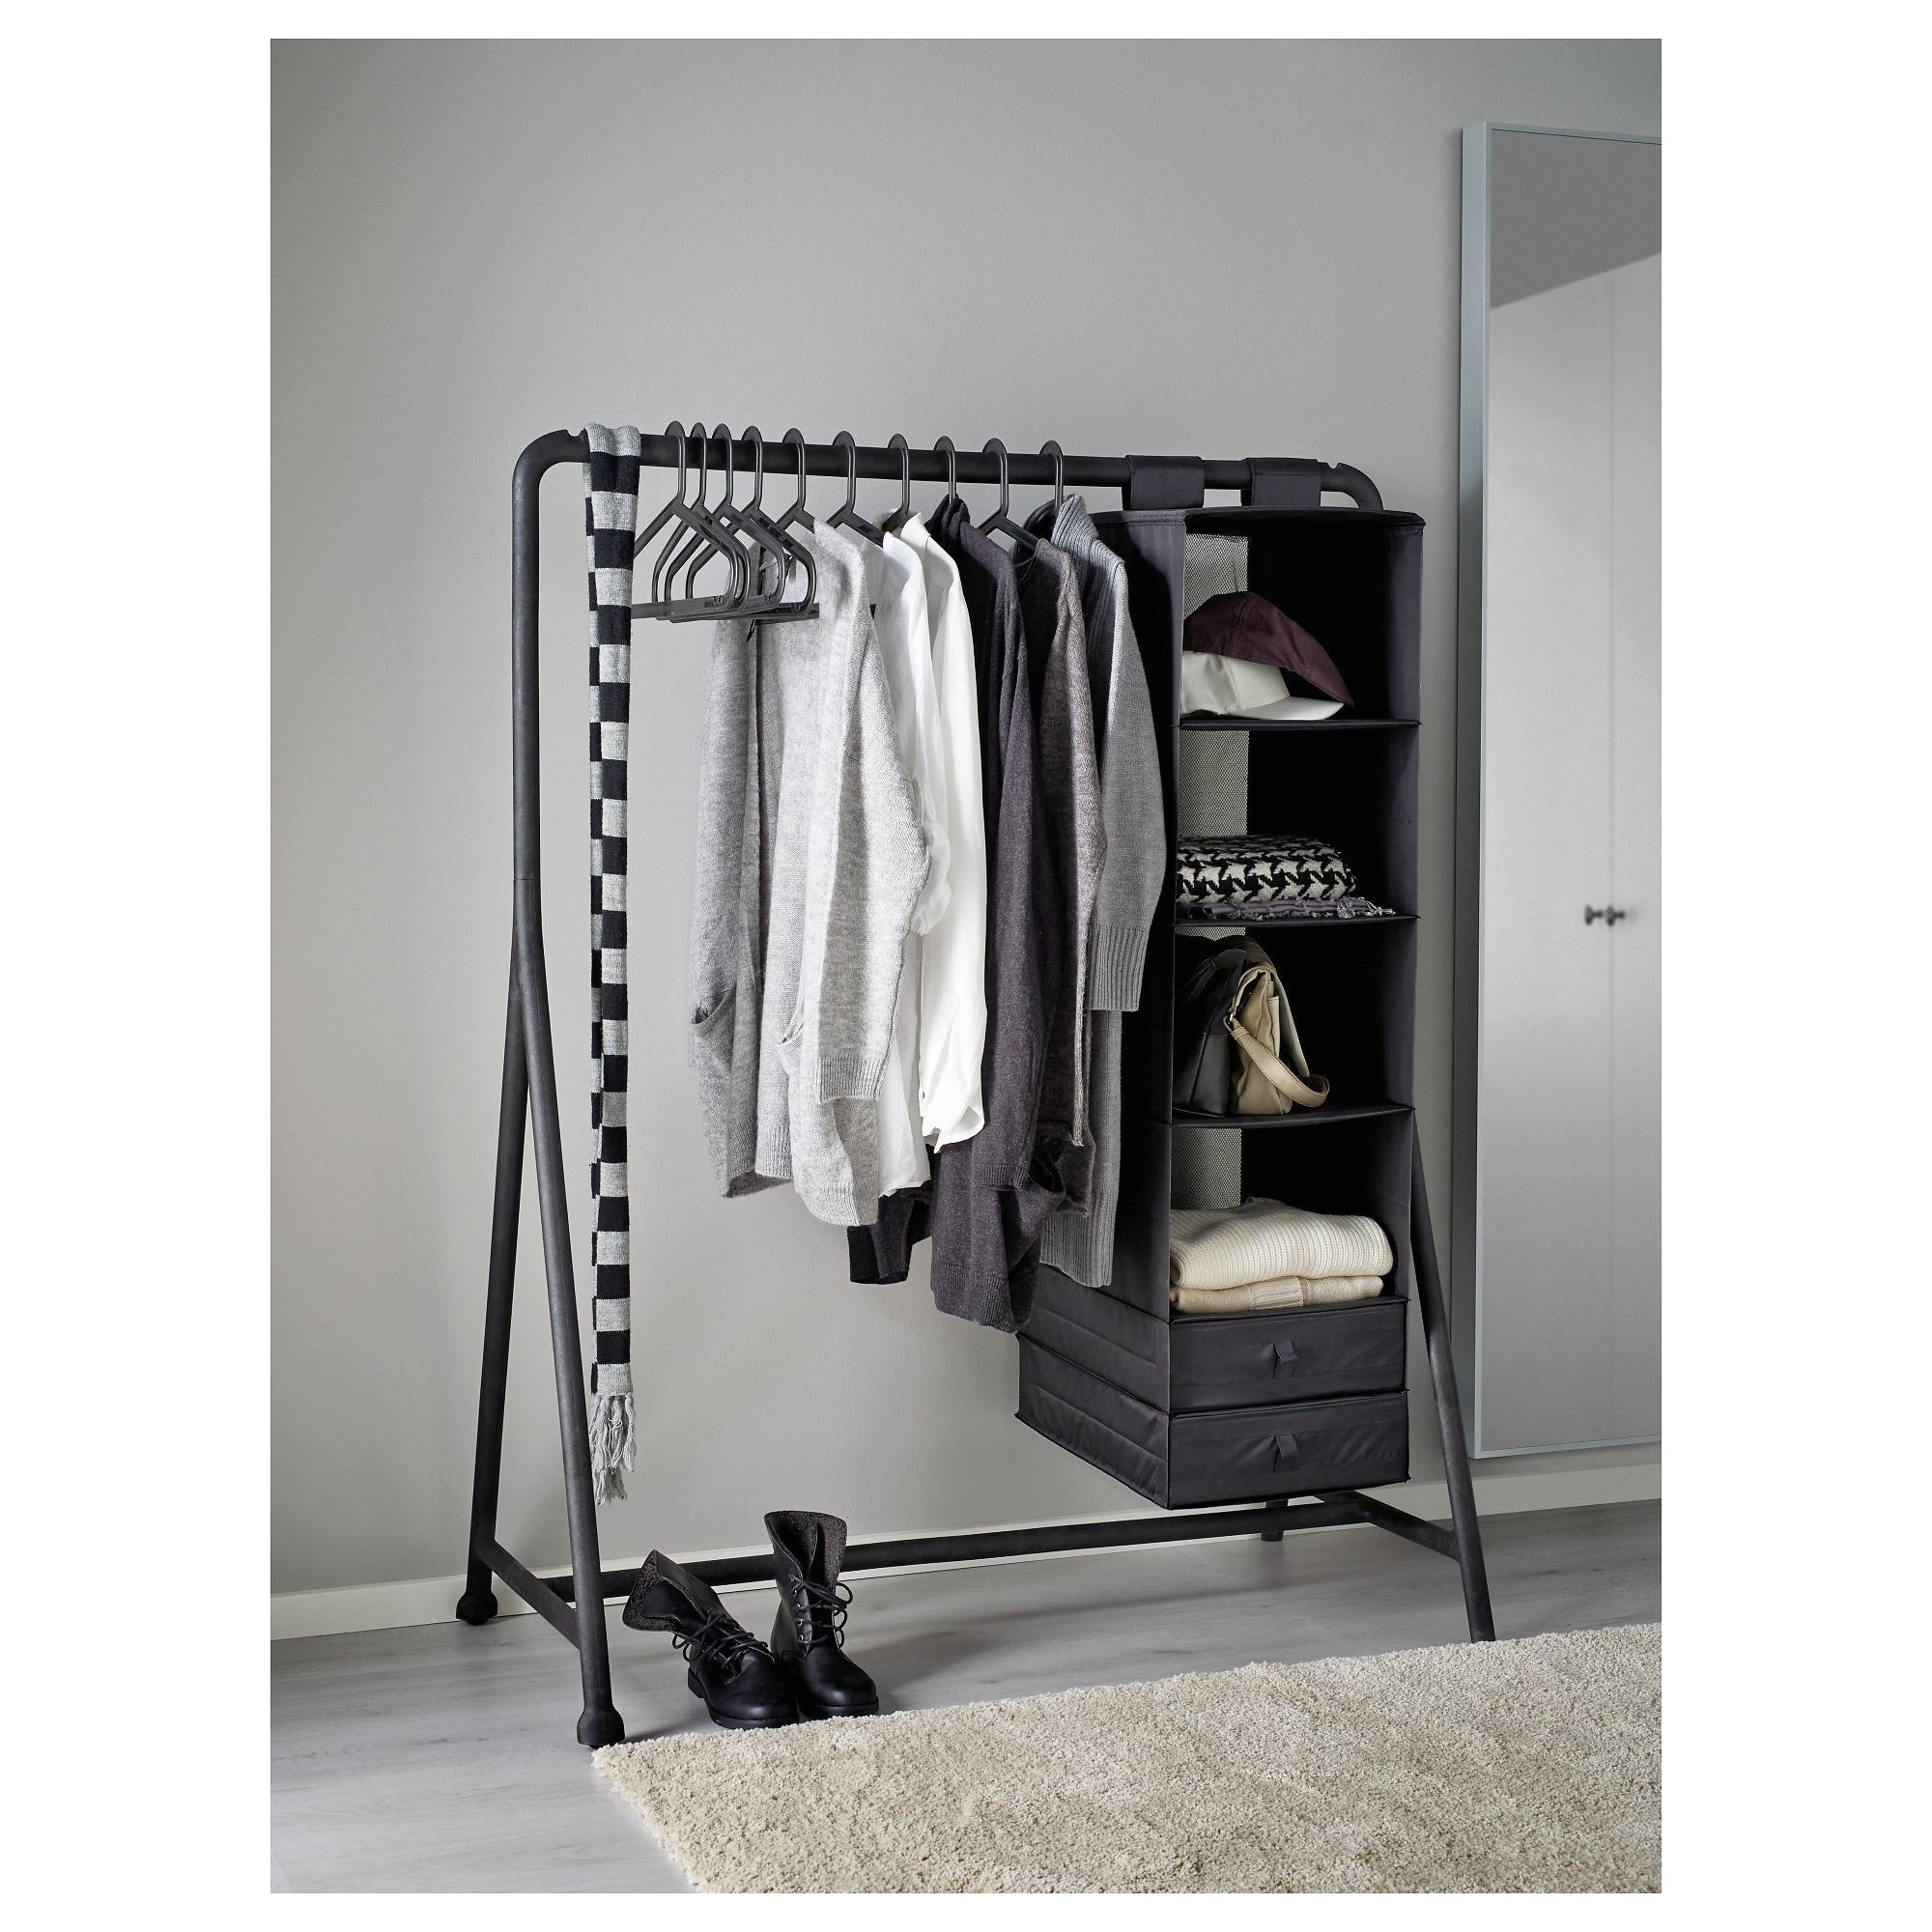 turbo clothes rack in outdoor black 0419110 pe576087 s5y wardrobe ikea suitable for both indoor and